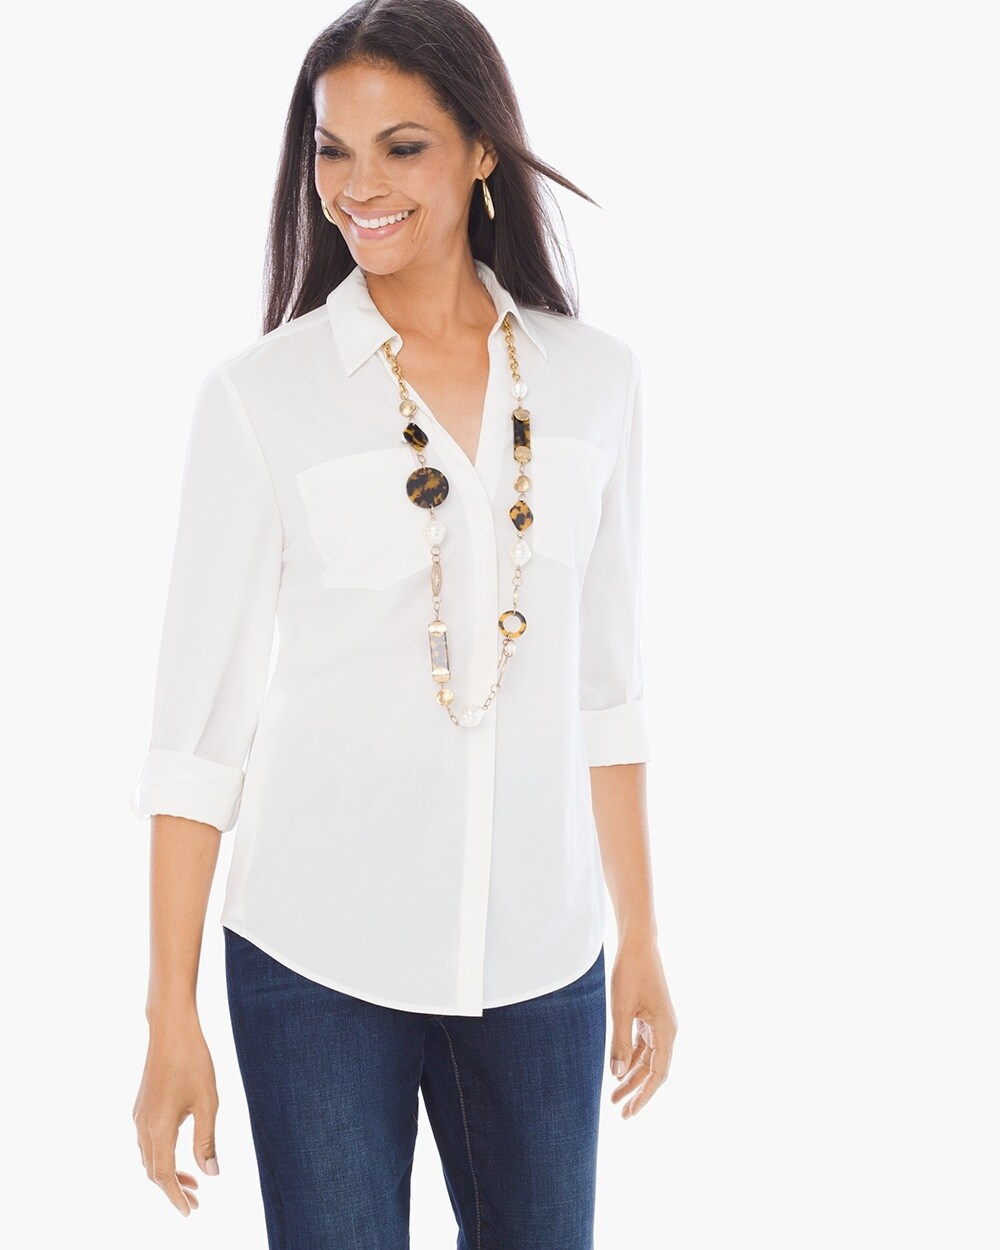 Silky Soft Relaxed Shirt -NLA